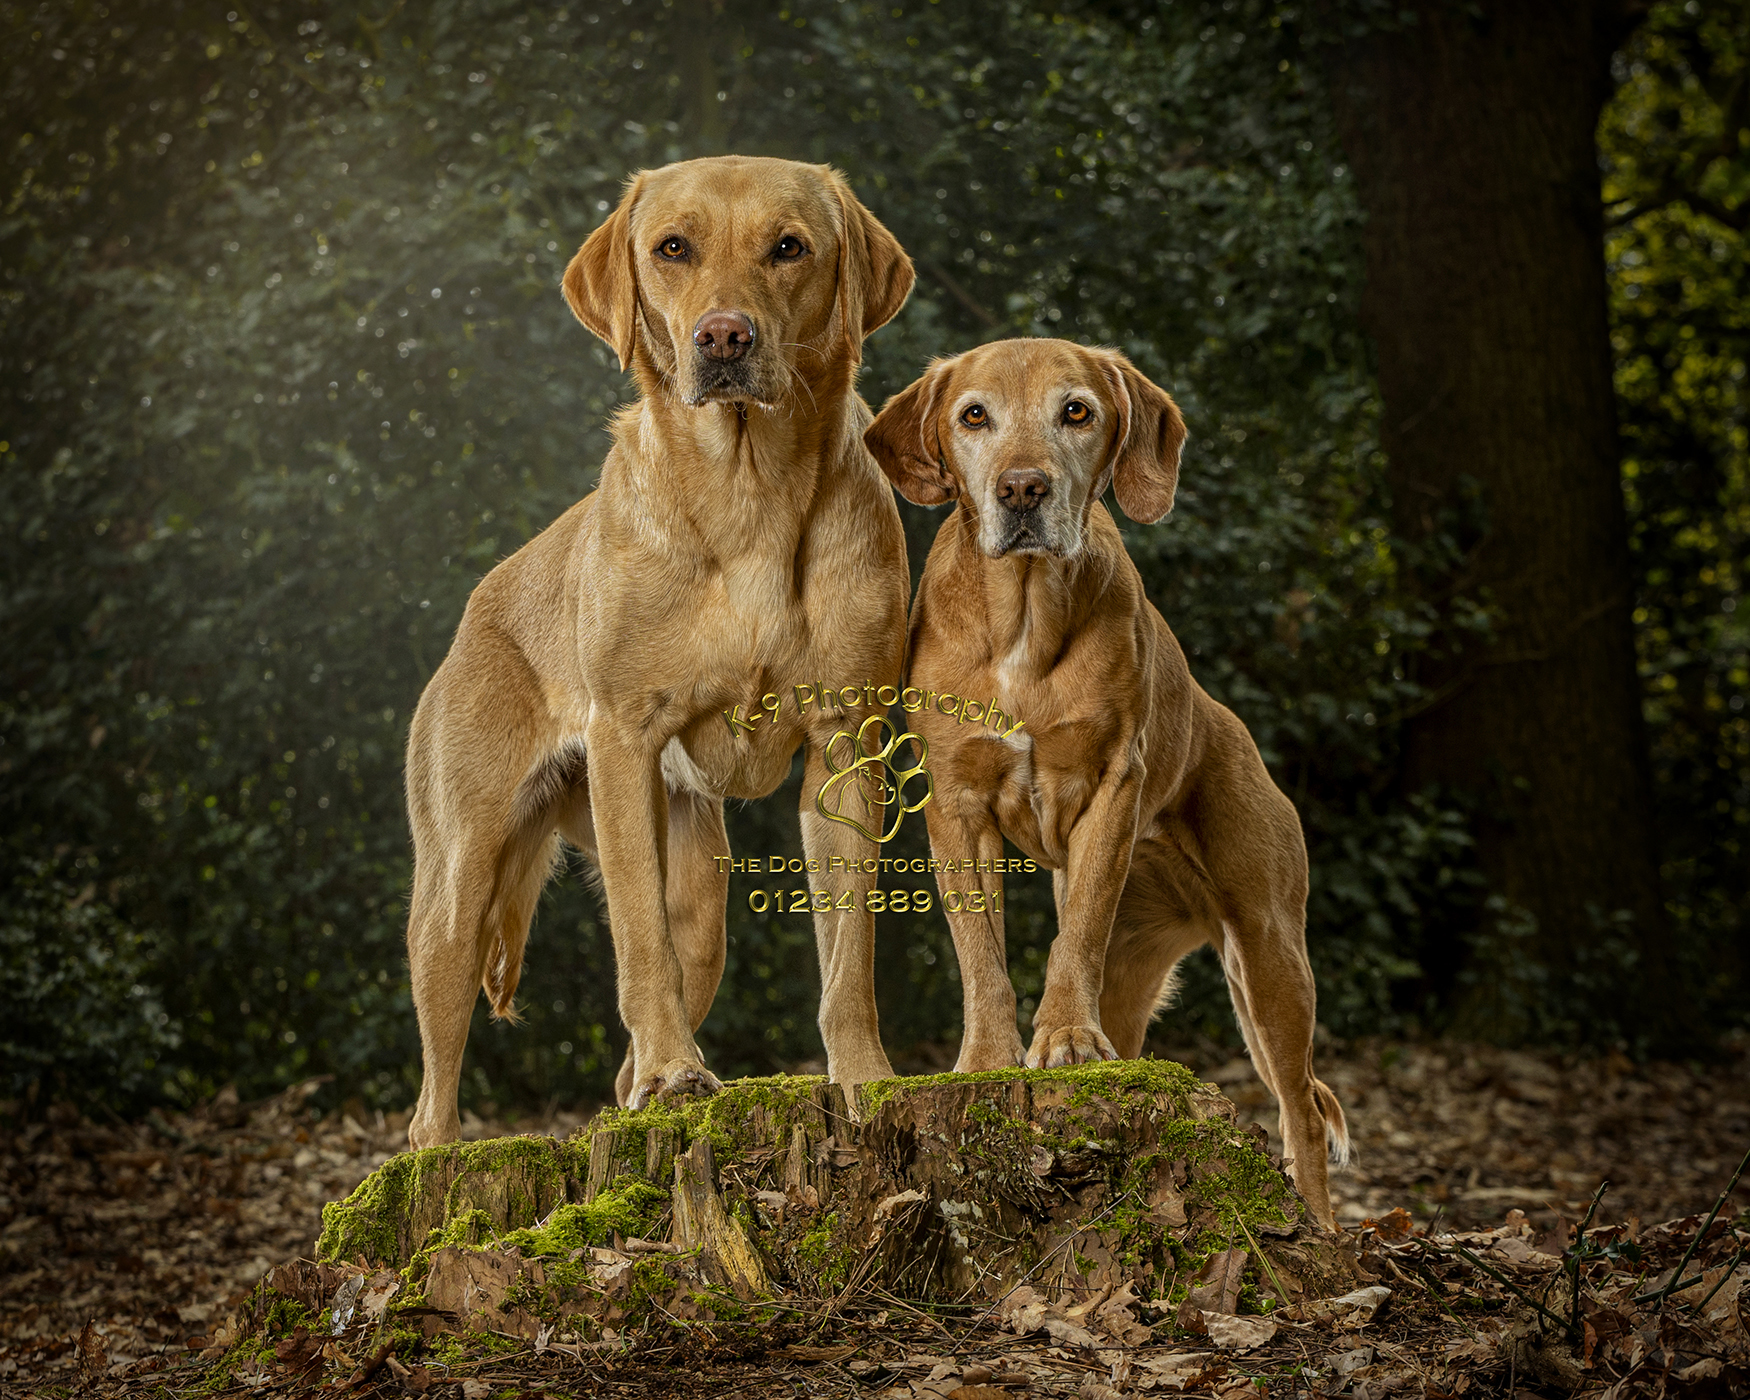 Pro tips for photographing your doggy companion